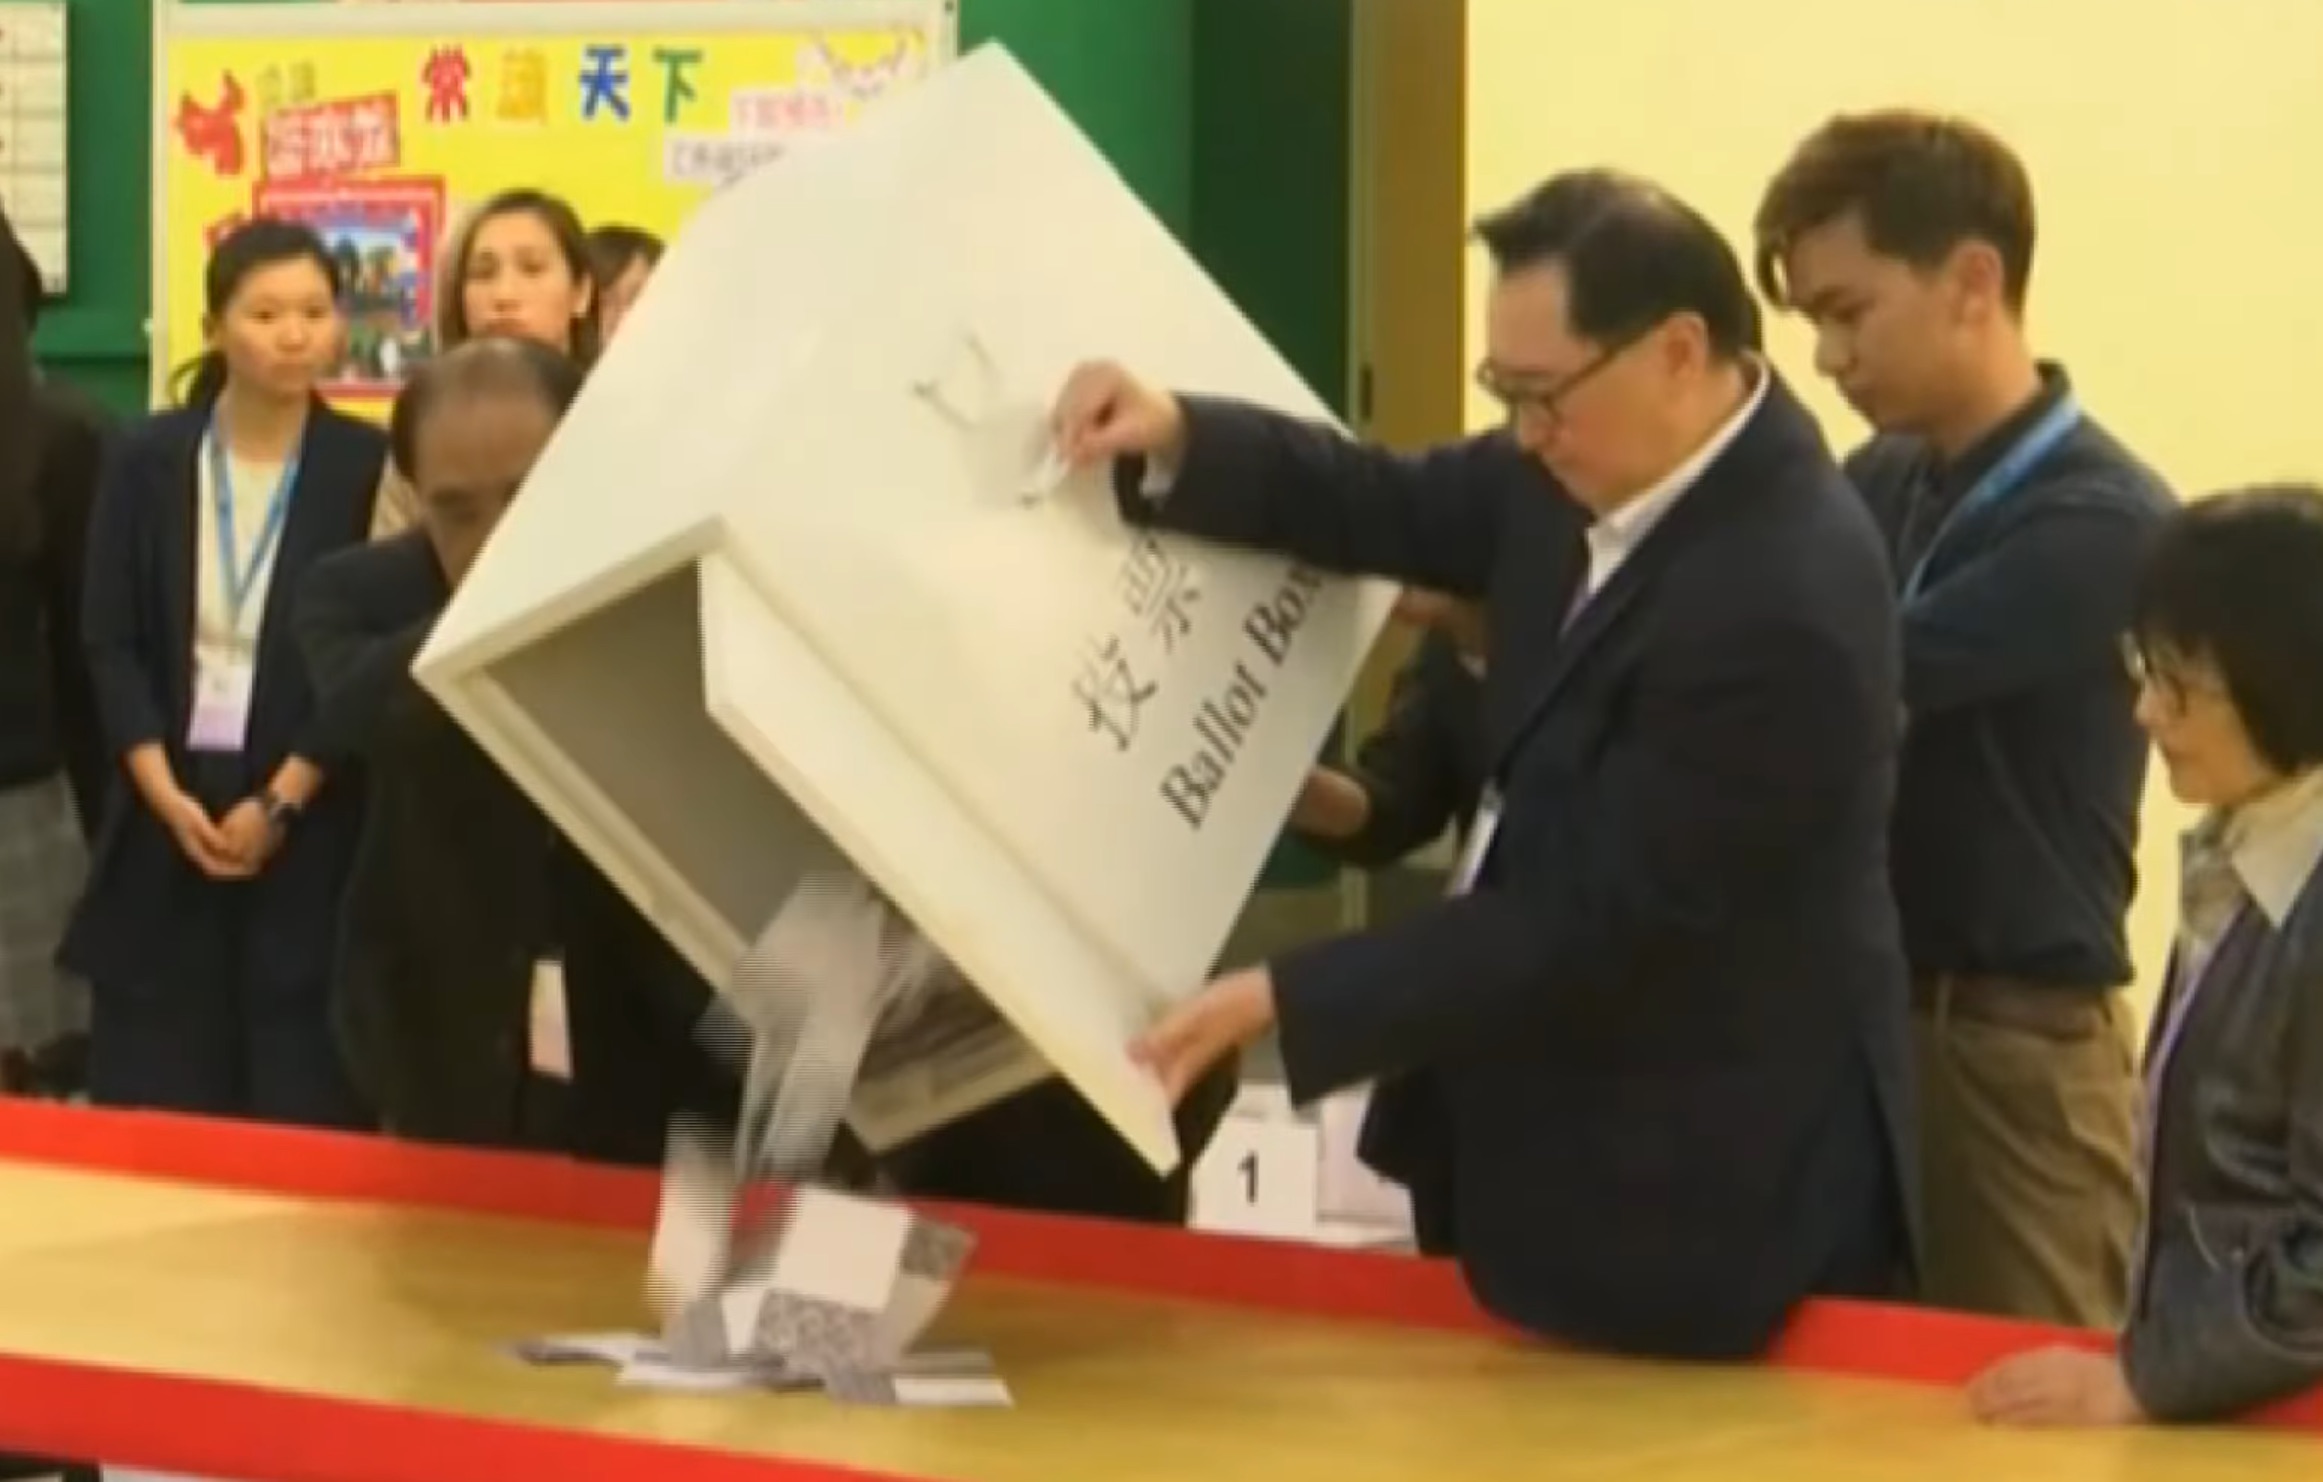 Election officials empty ballots onto a table as counting in Hong Kong’s district council elections gets underway last night. Screengrab via YouTube.